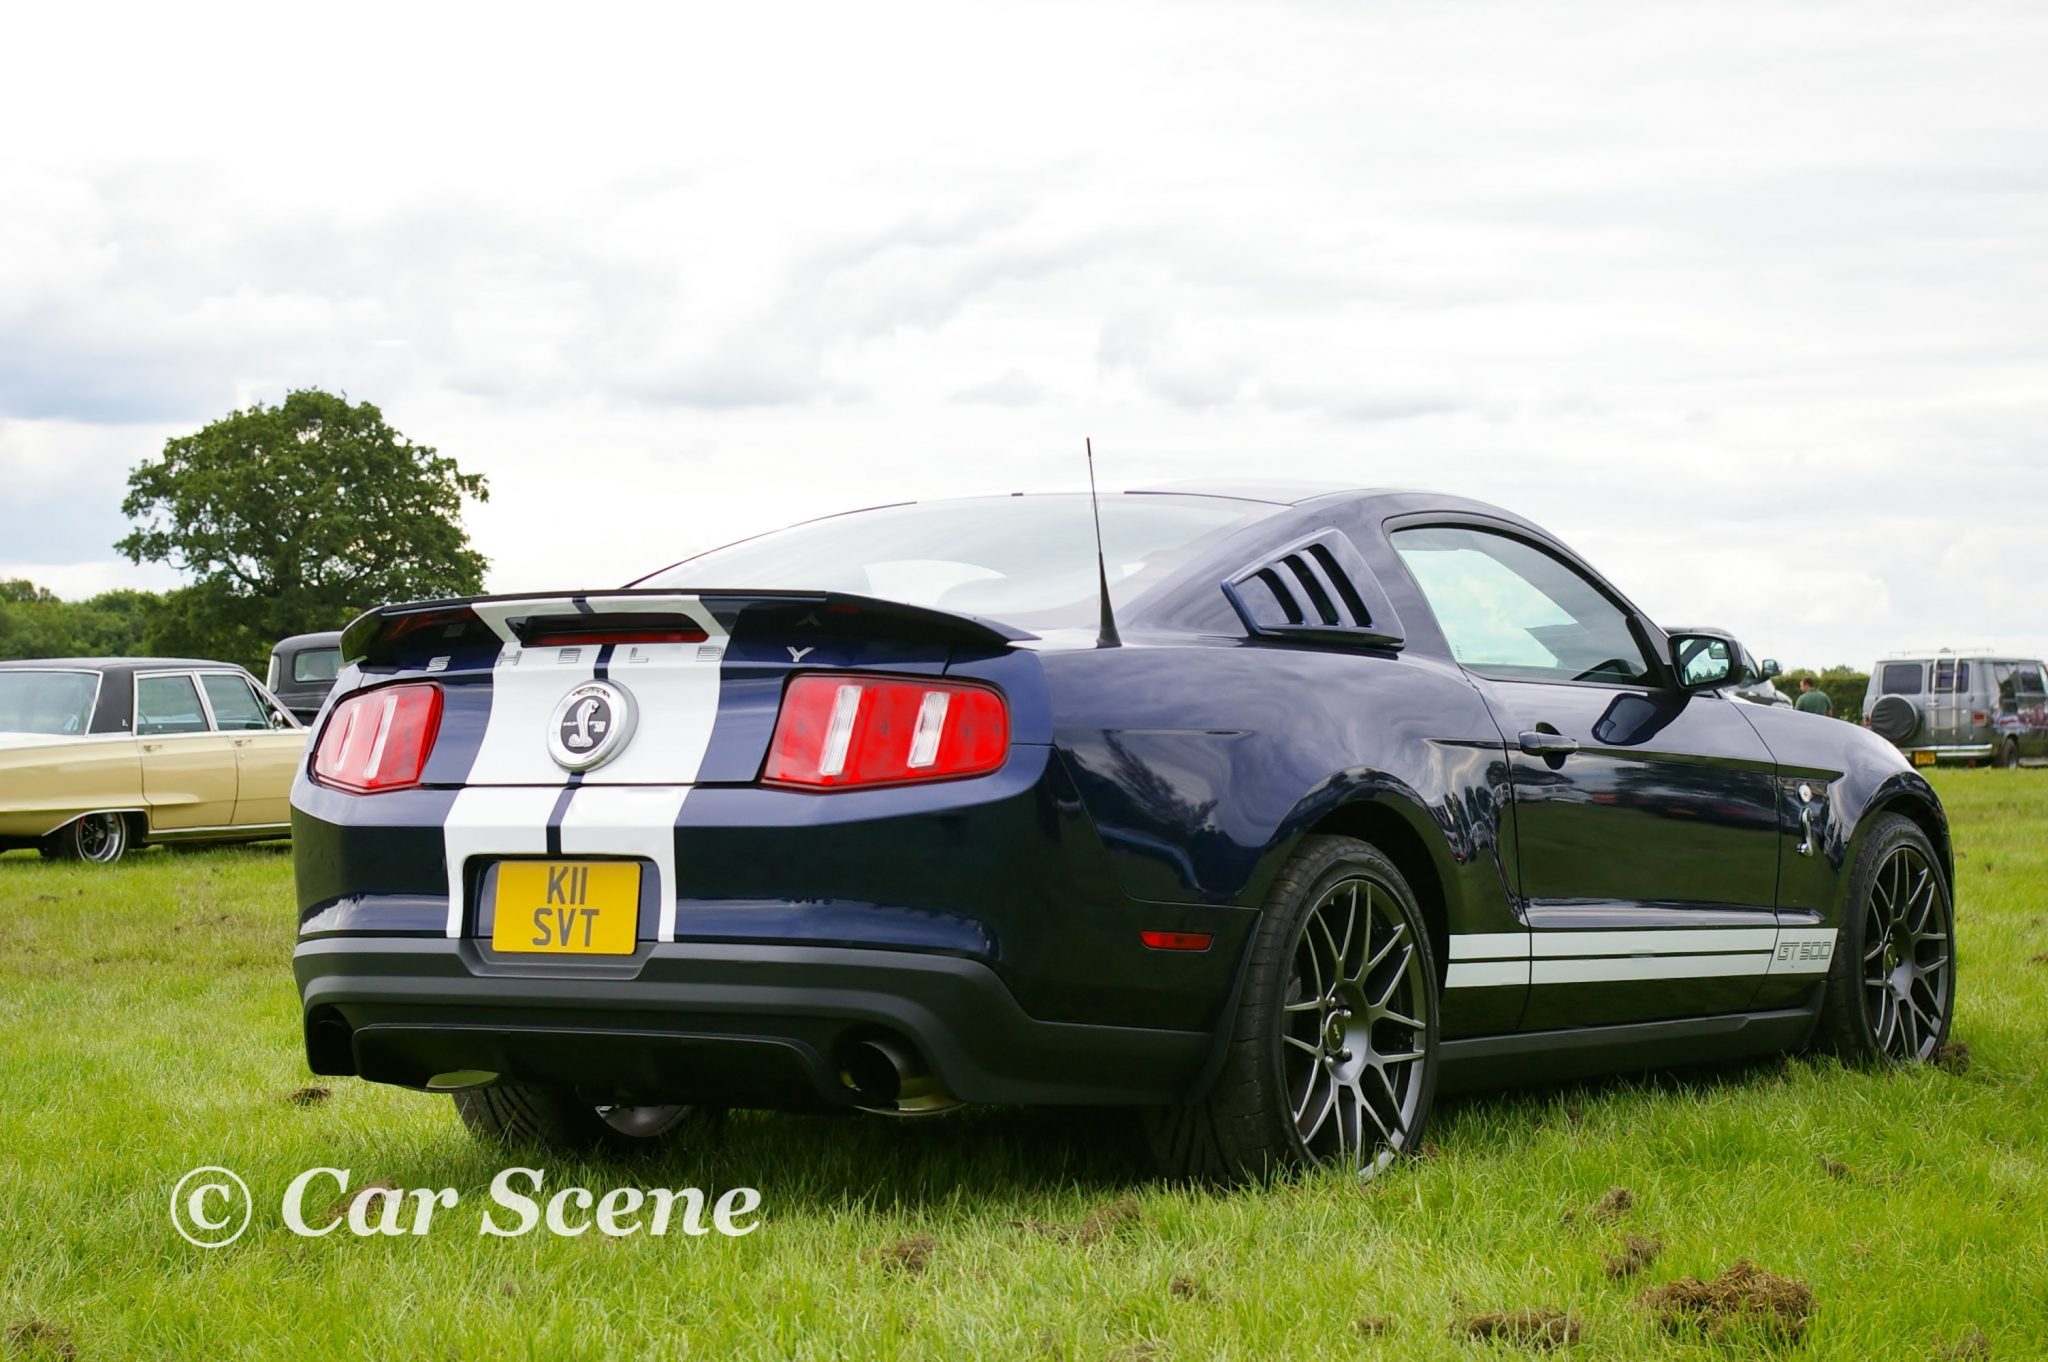 2005 Ford Mustang GT500 rear three quarters view